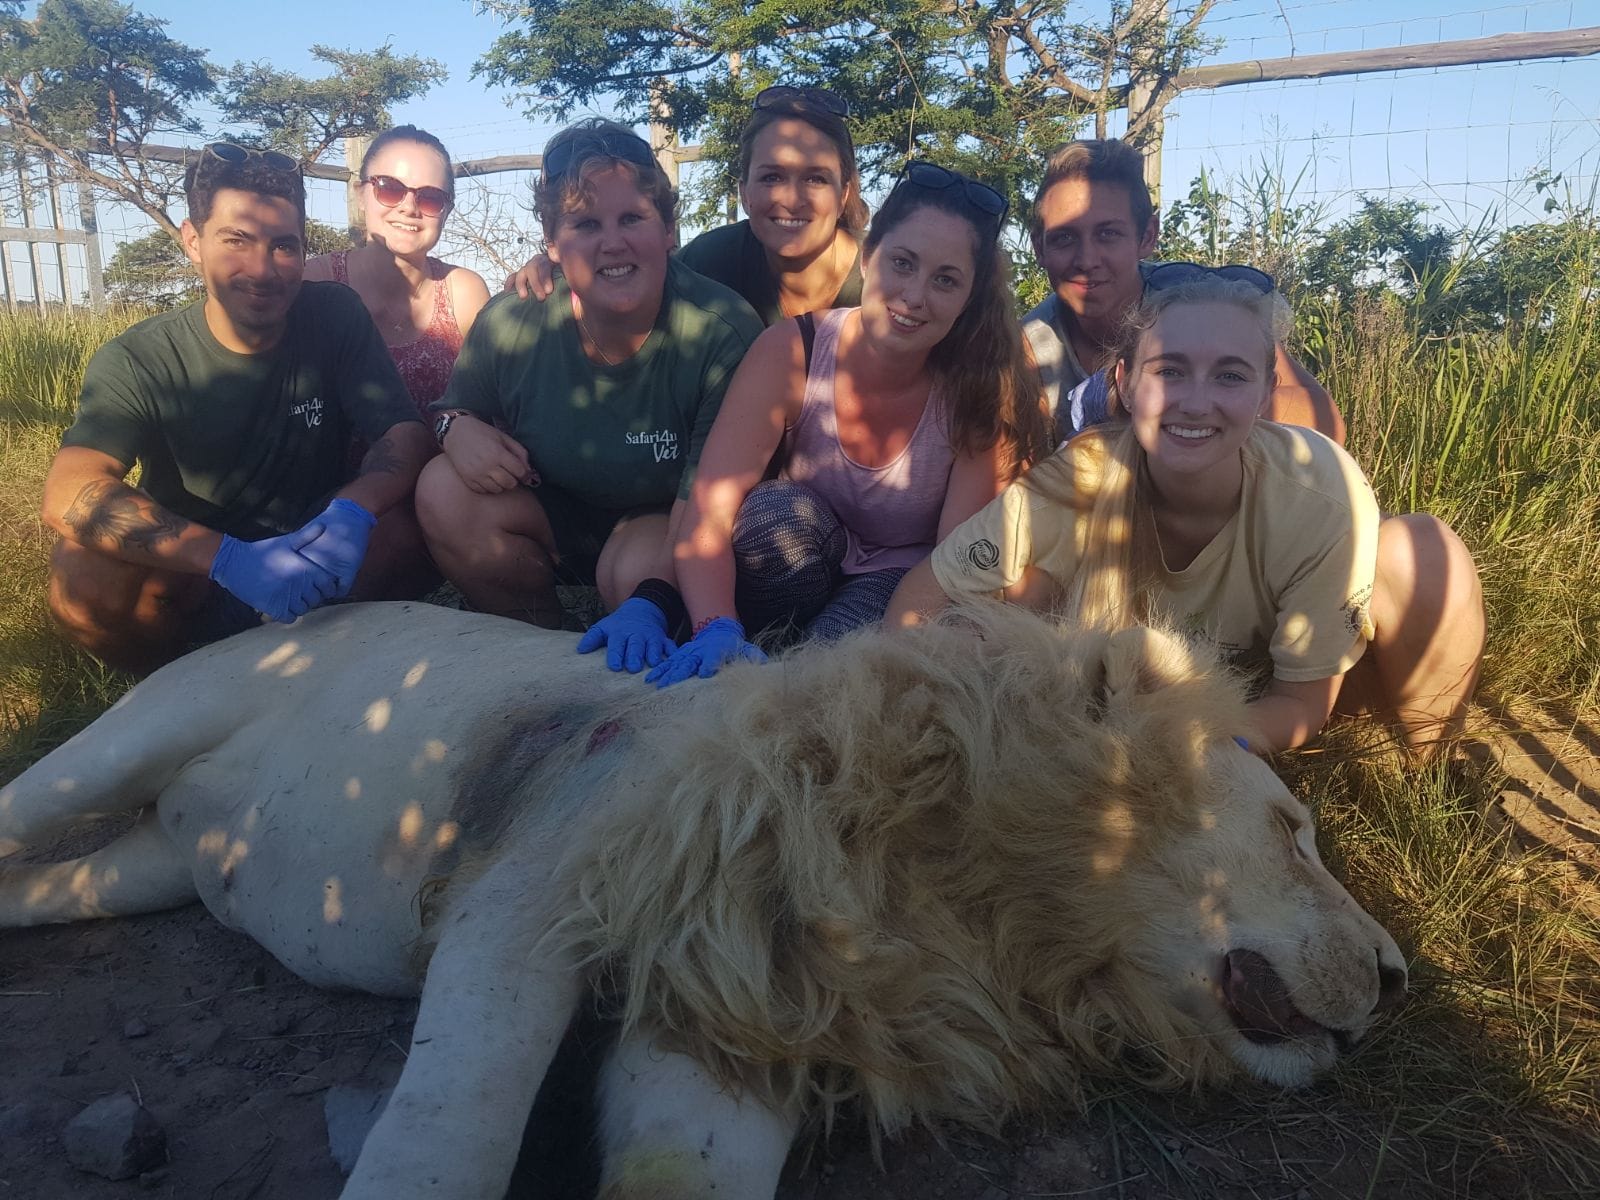 Some people helping to give treatment to a lion laying on the ground